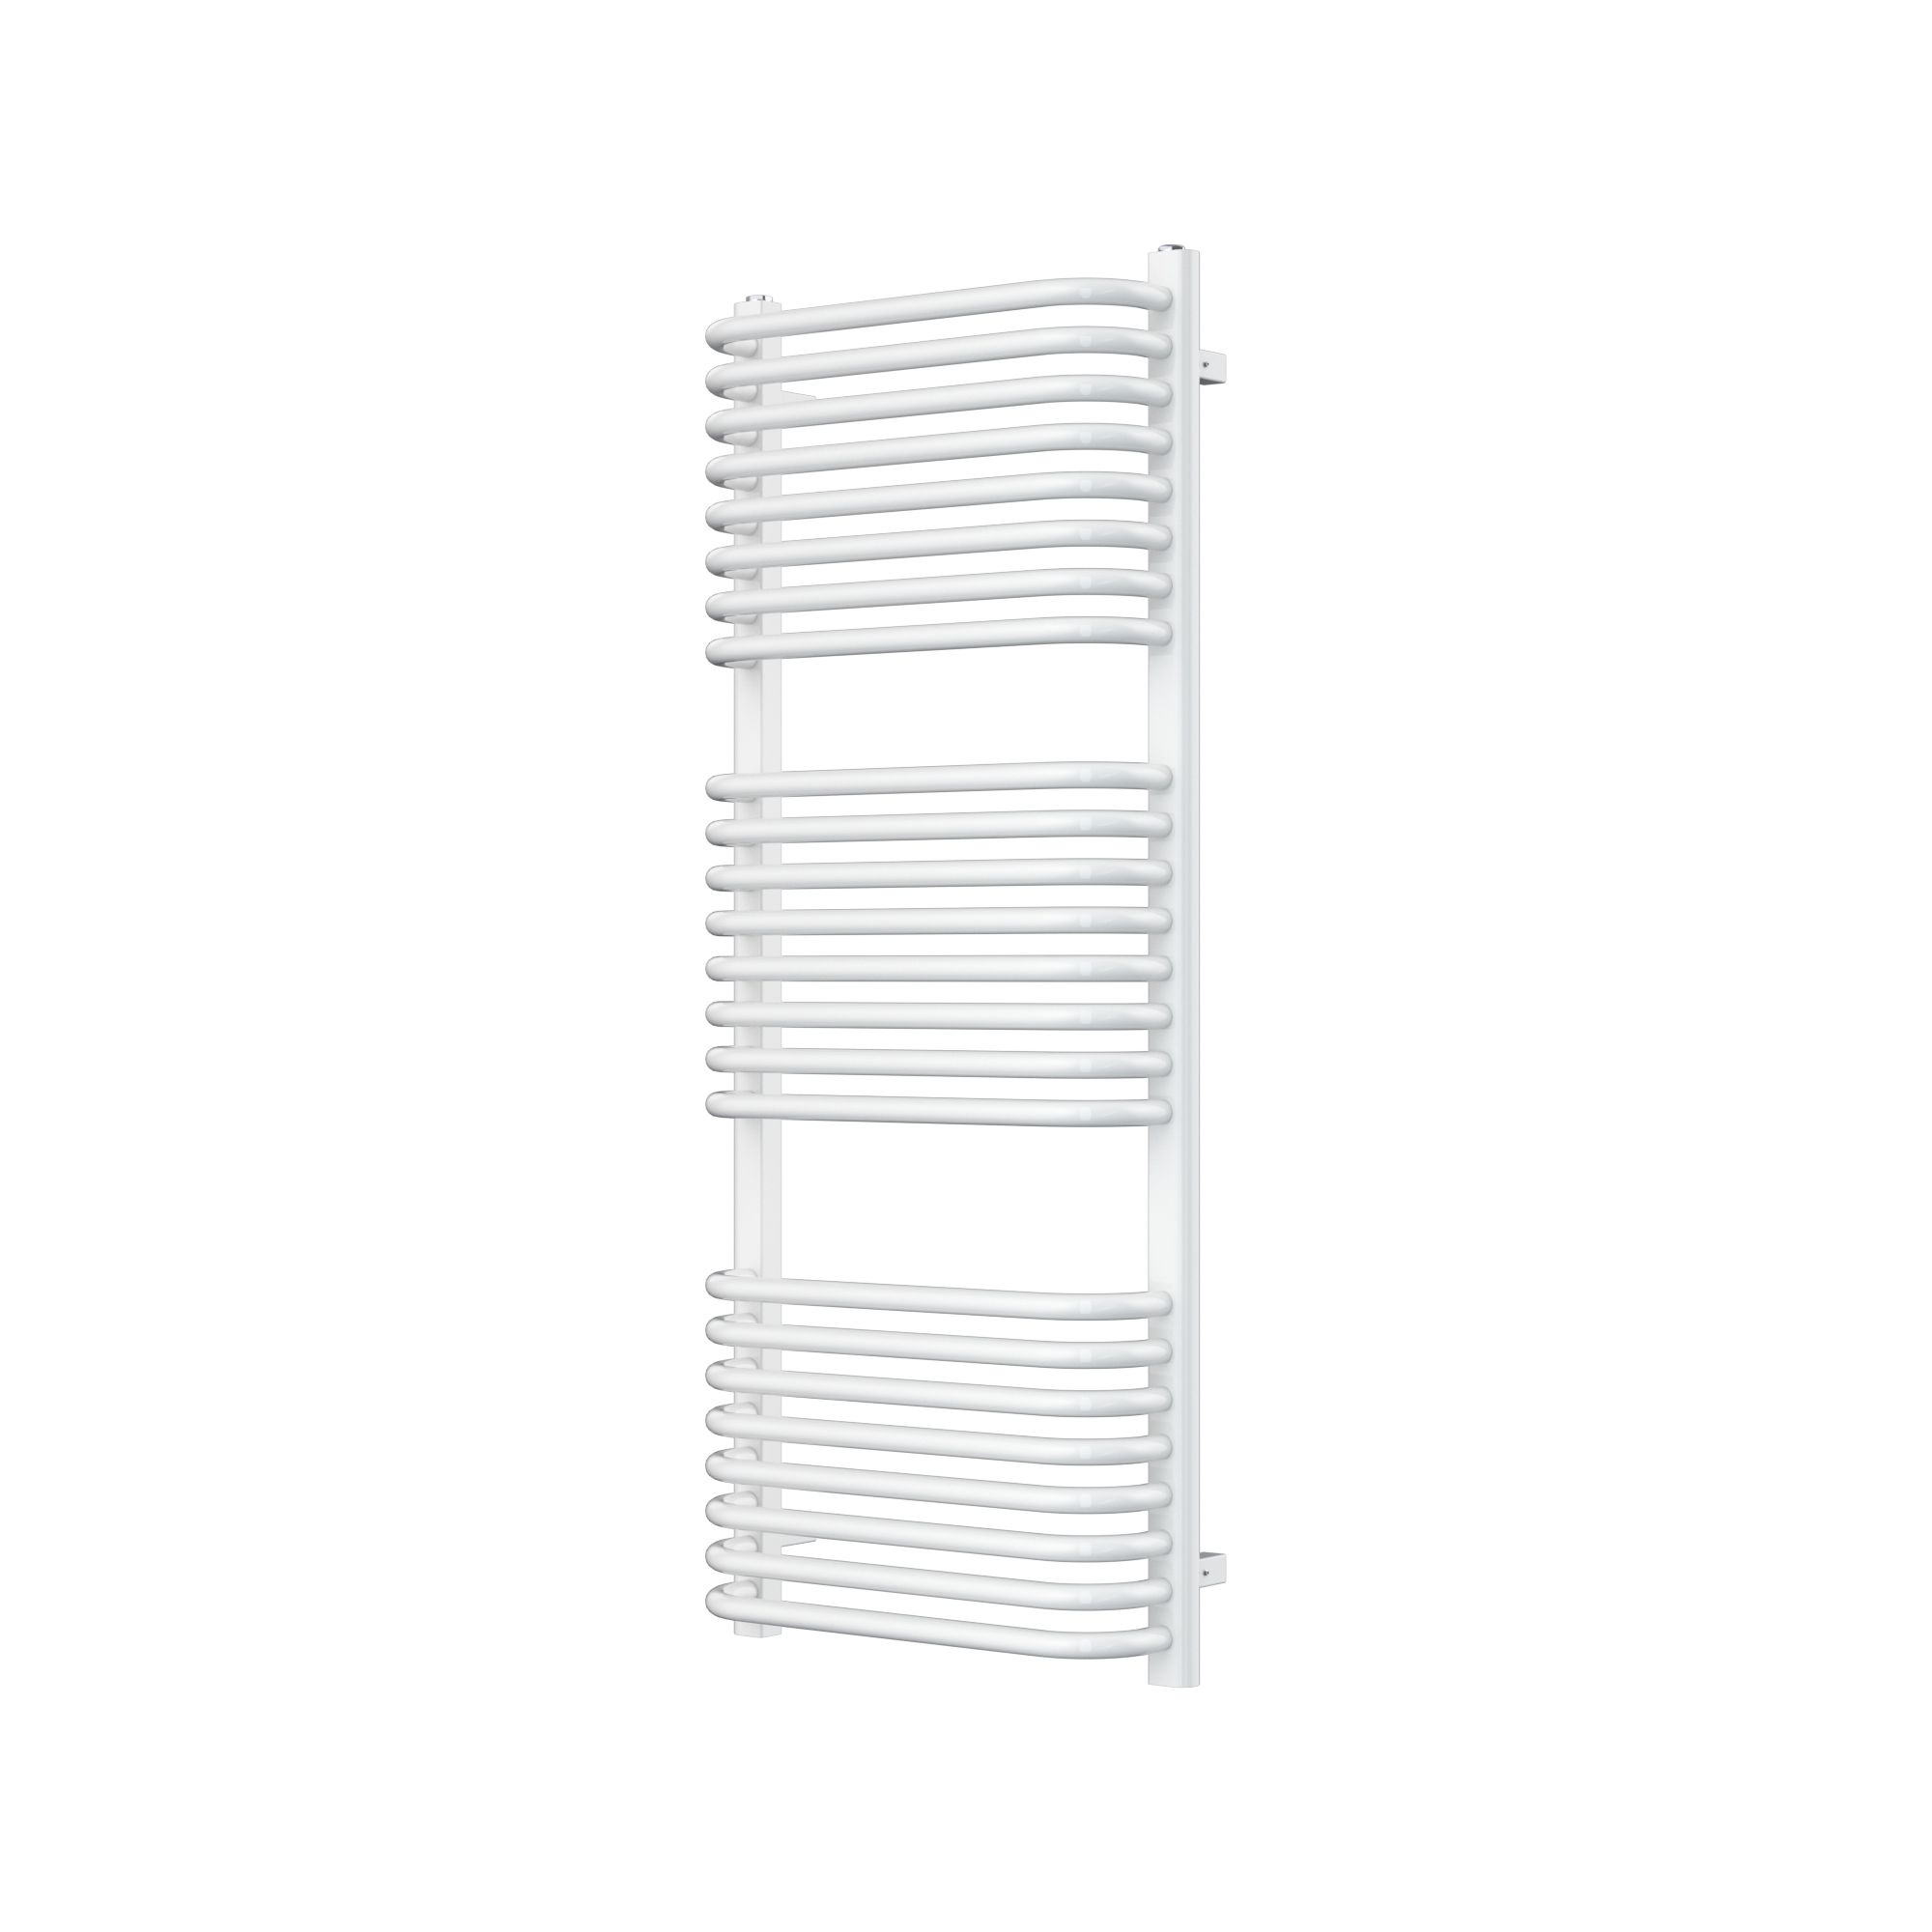 GoodHome Lilium, White Vertical Curved Towel radiator (W)500mm x (H)1200mm